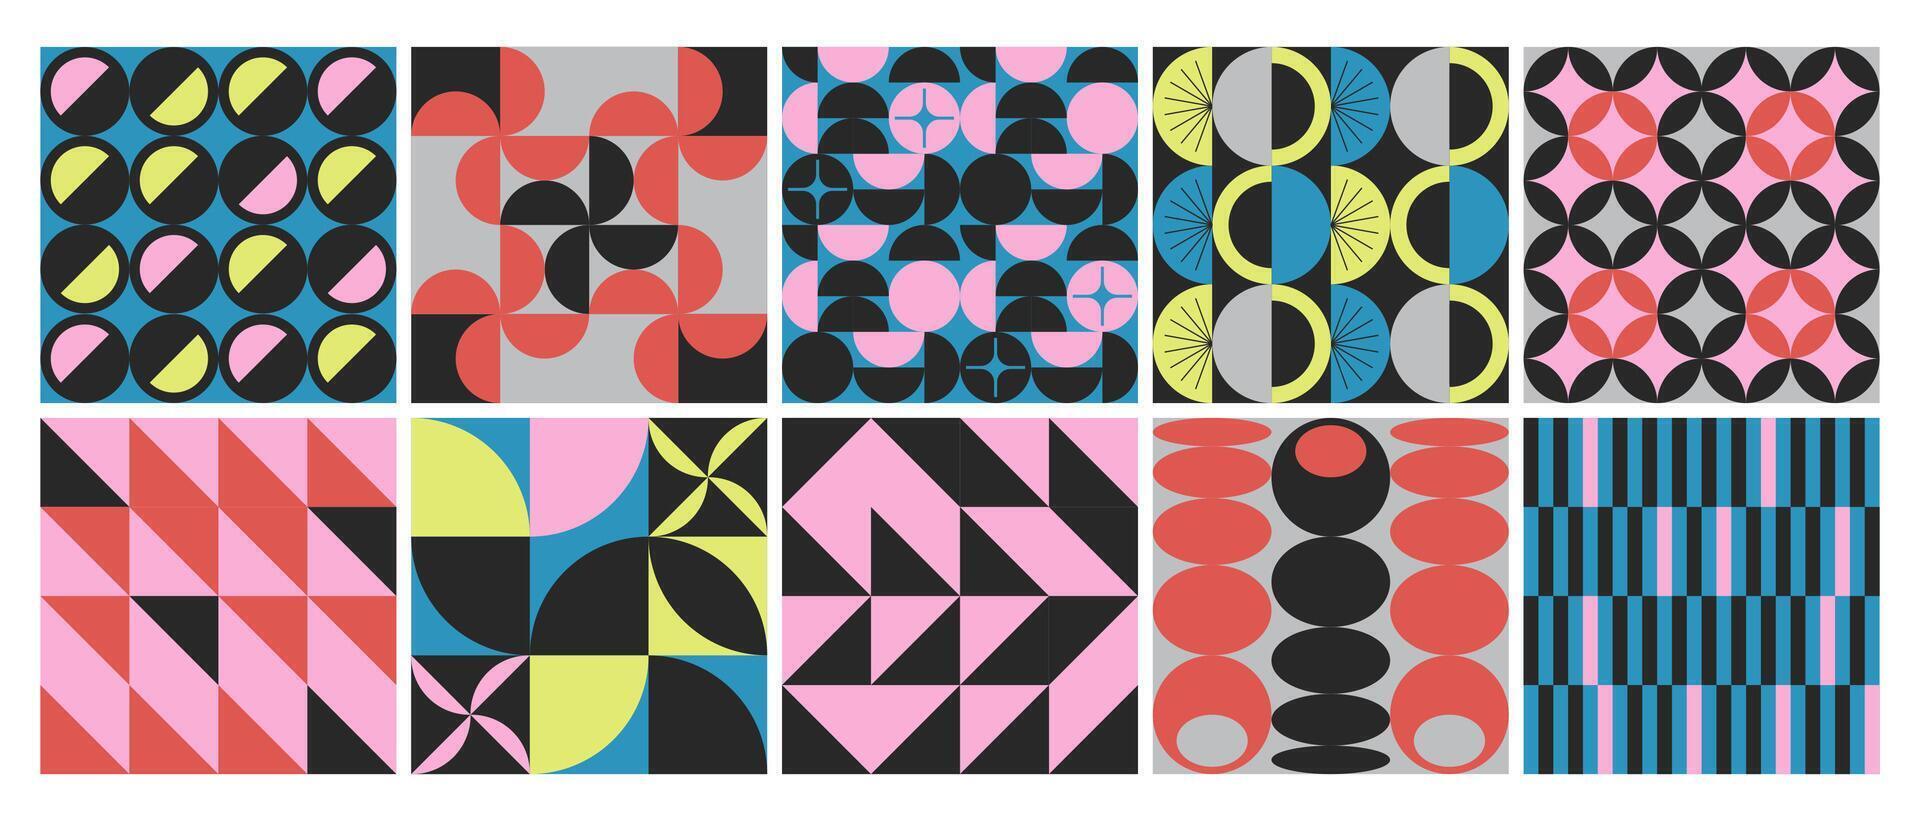 Minimalist geometric poster set with simple minimal vector pattern. Abstract shapes backgrounds in modern brutalist style. Trendy bauhaus patterns with retro elements, contemporary figures, bold forms